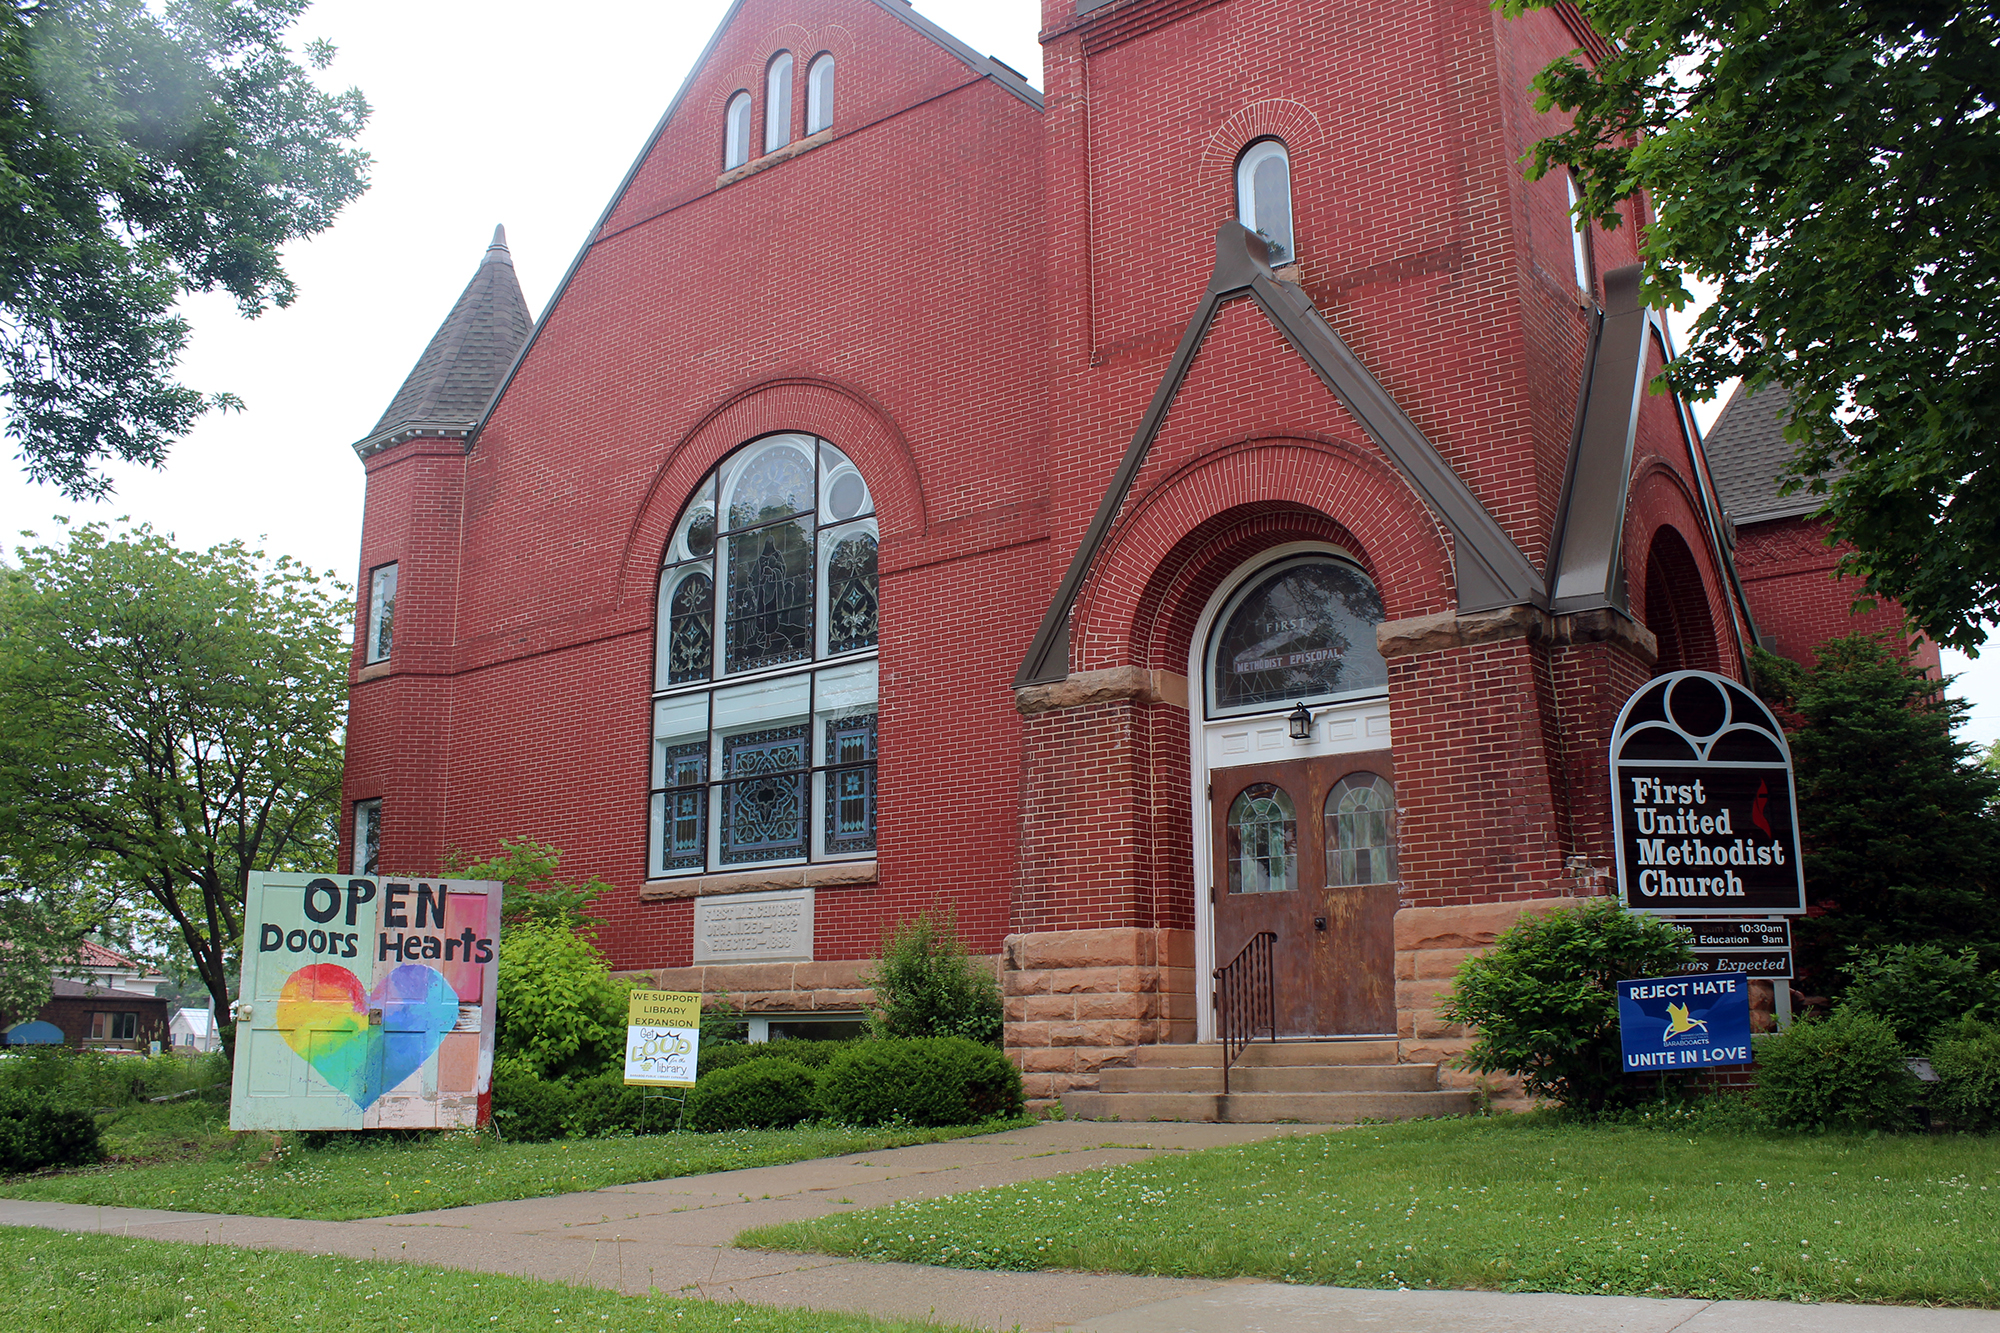 For United Methodists In Wisconsin, The Future Is Unclear